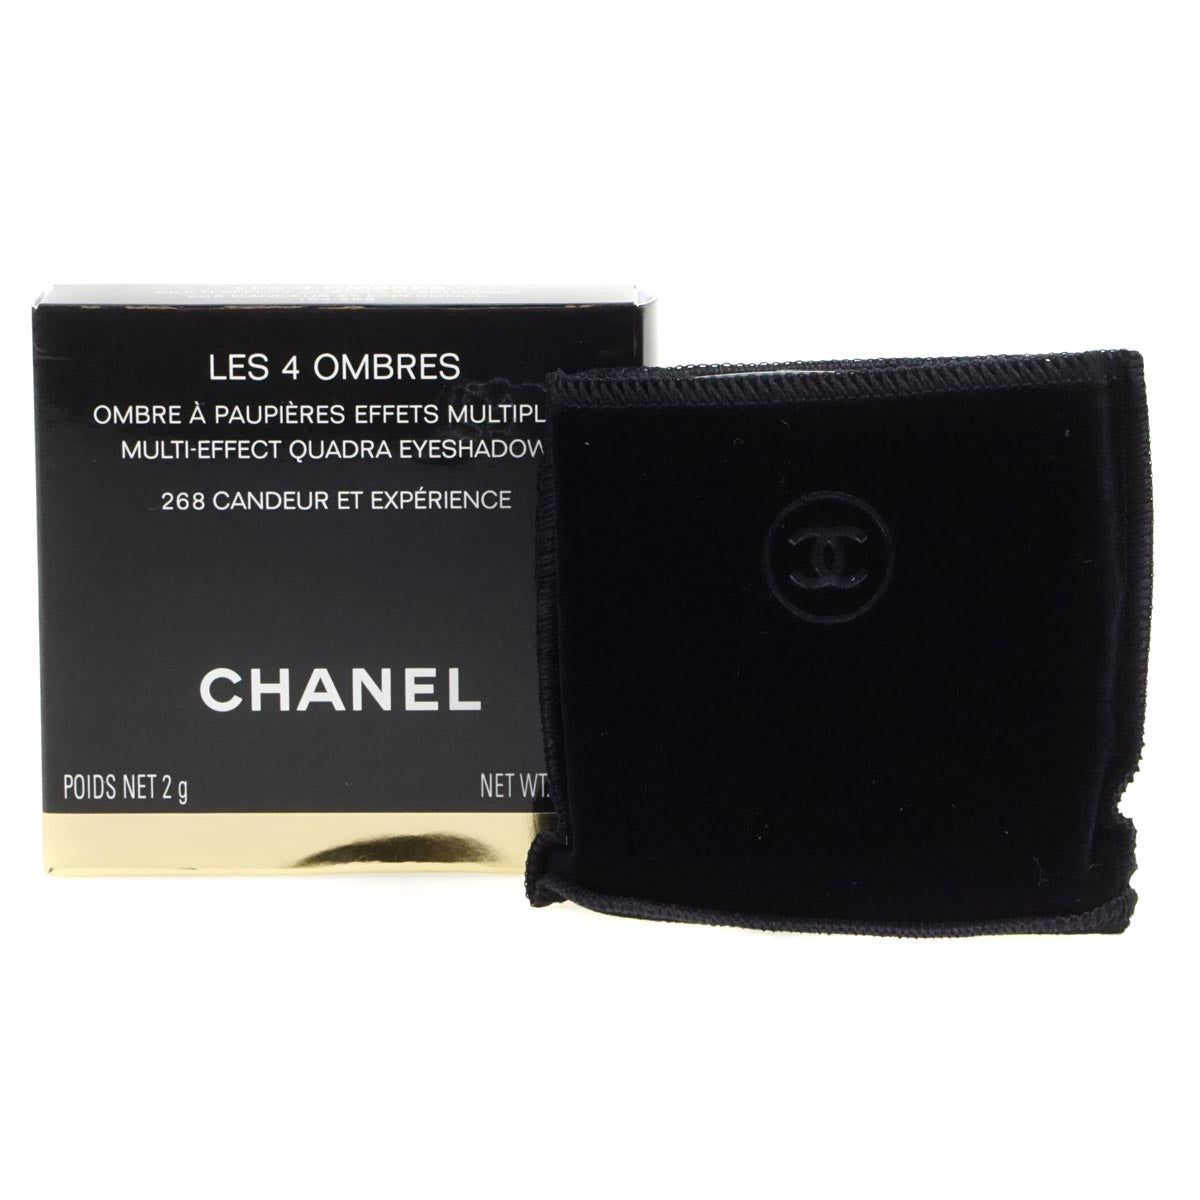 Chanel Les 4 Ombres Eyeshadow 268 Candeur Et Experience